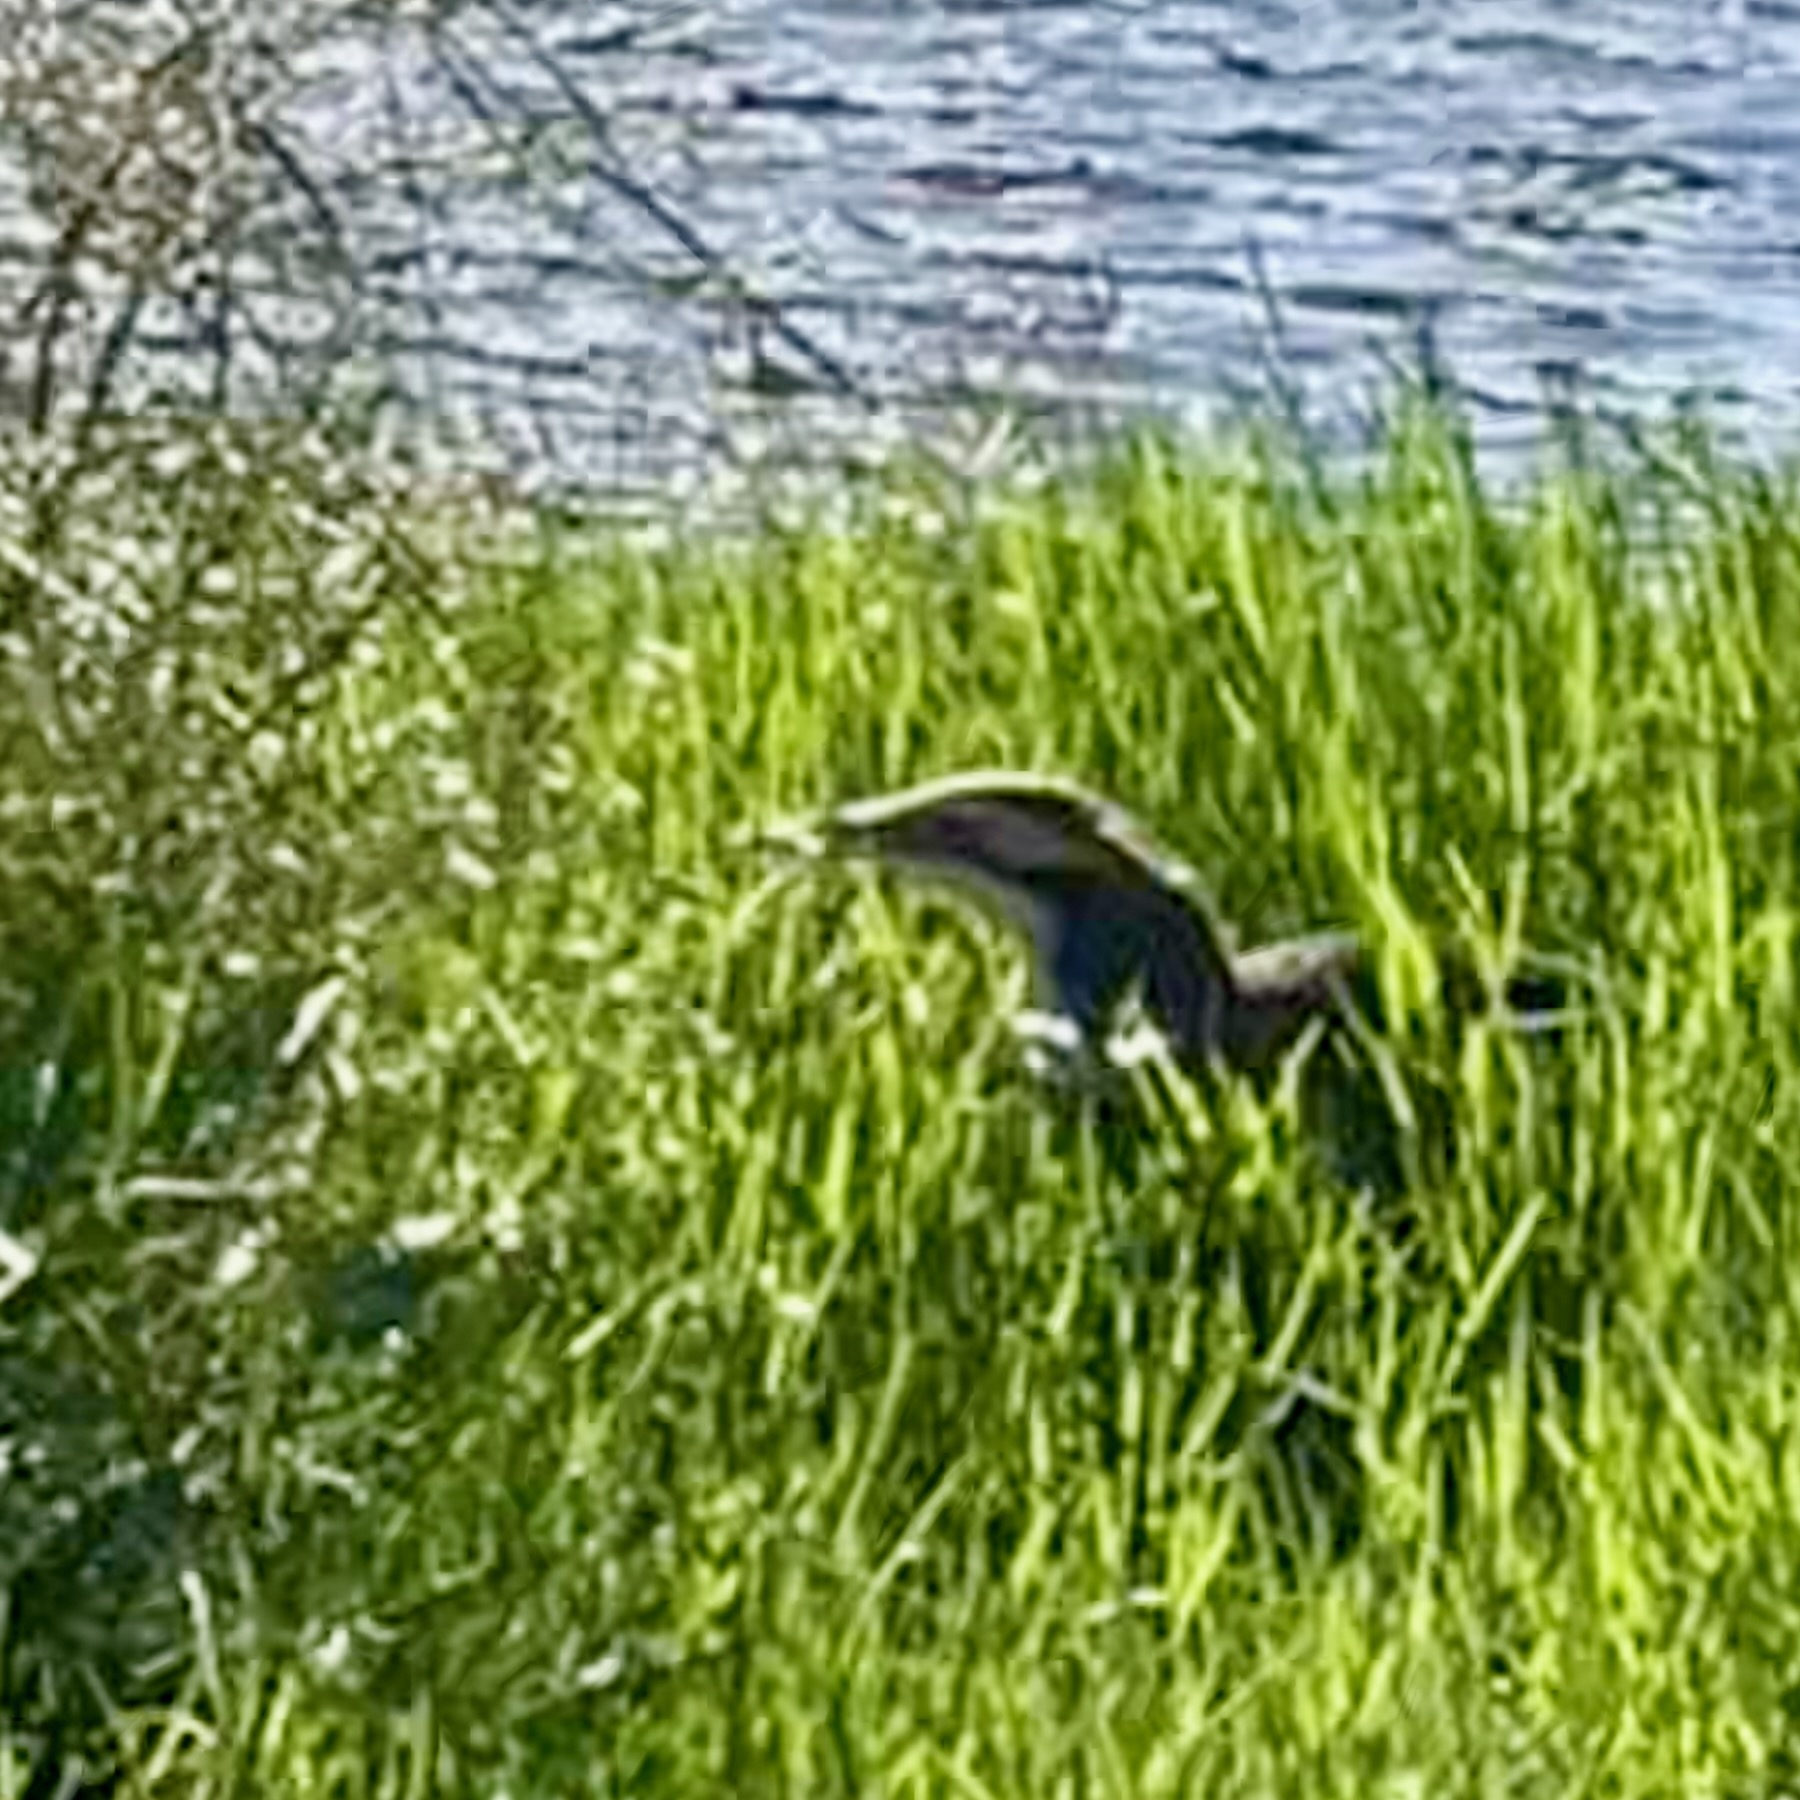 A slightly blurry bird in rushes by a lake. 